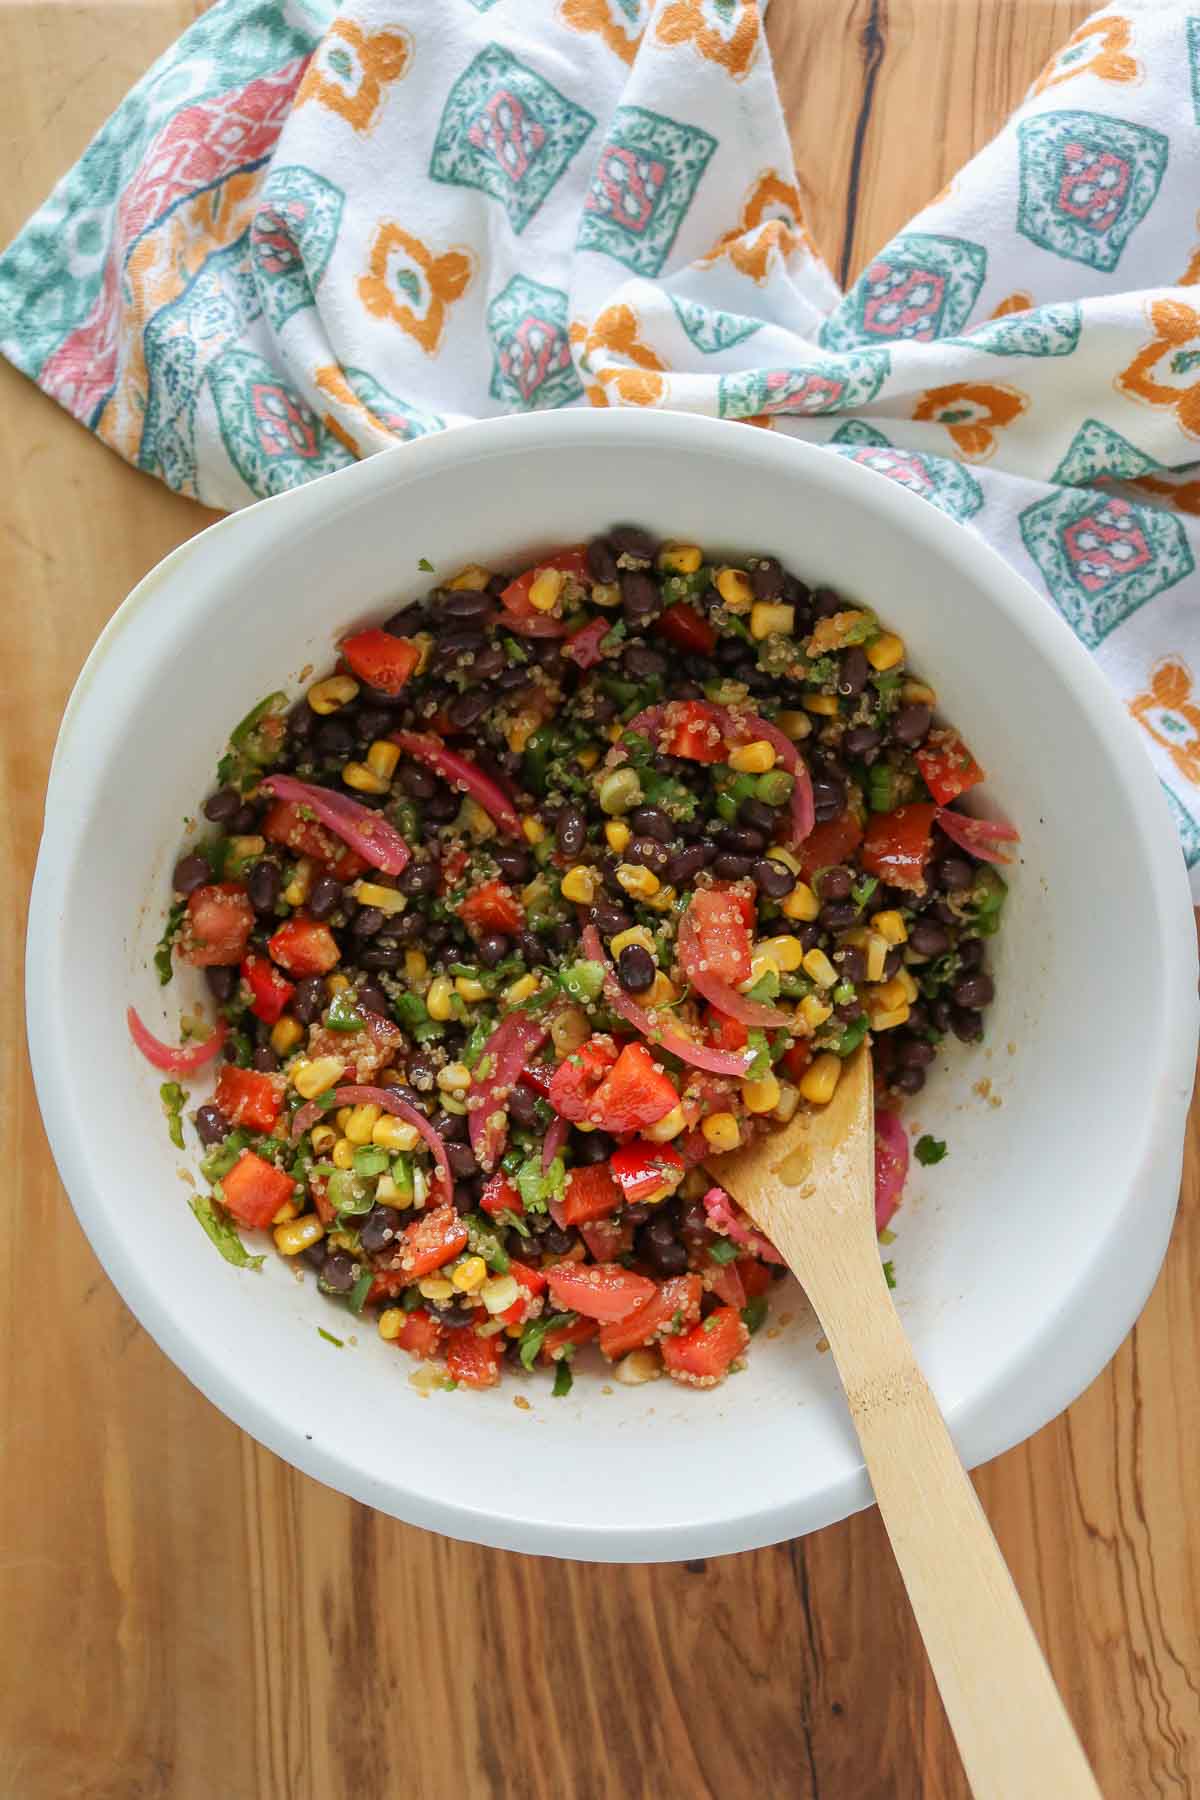 Corn and black bean quinoa salad in a bowl with a wooden spoon.